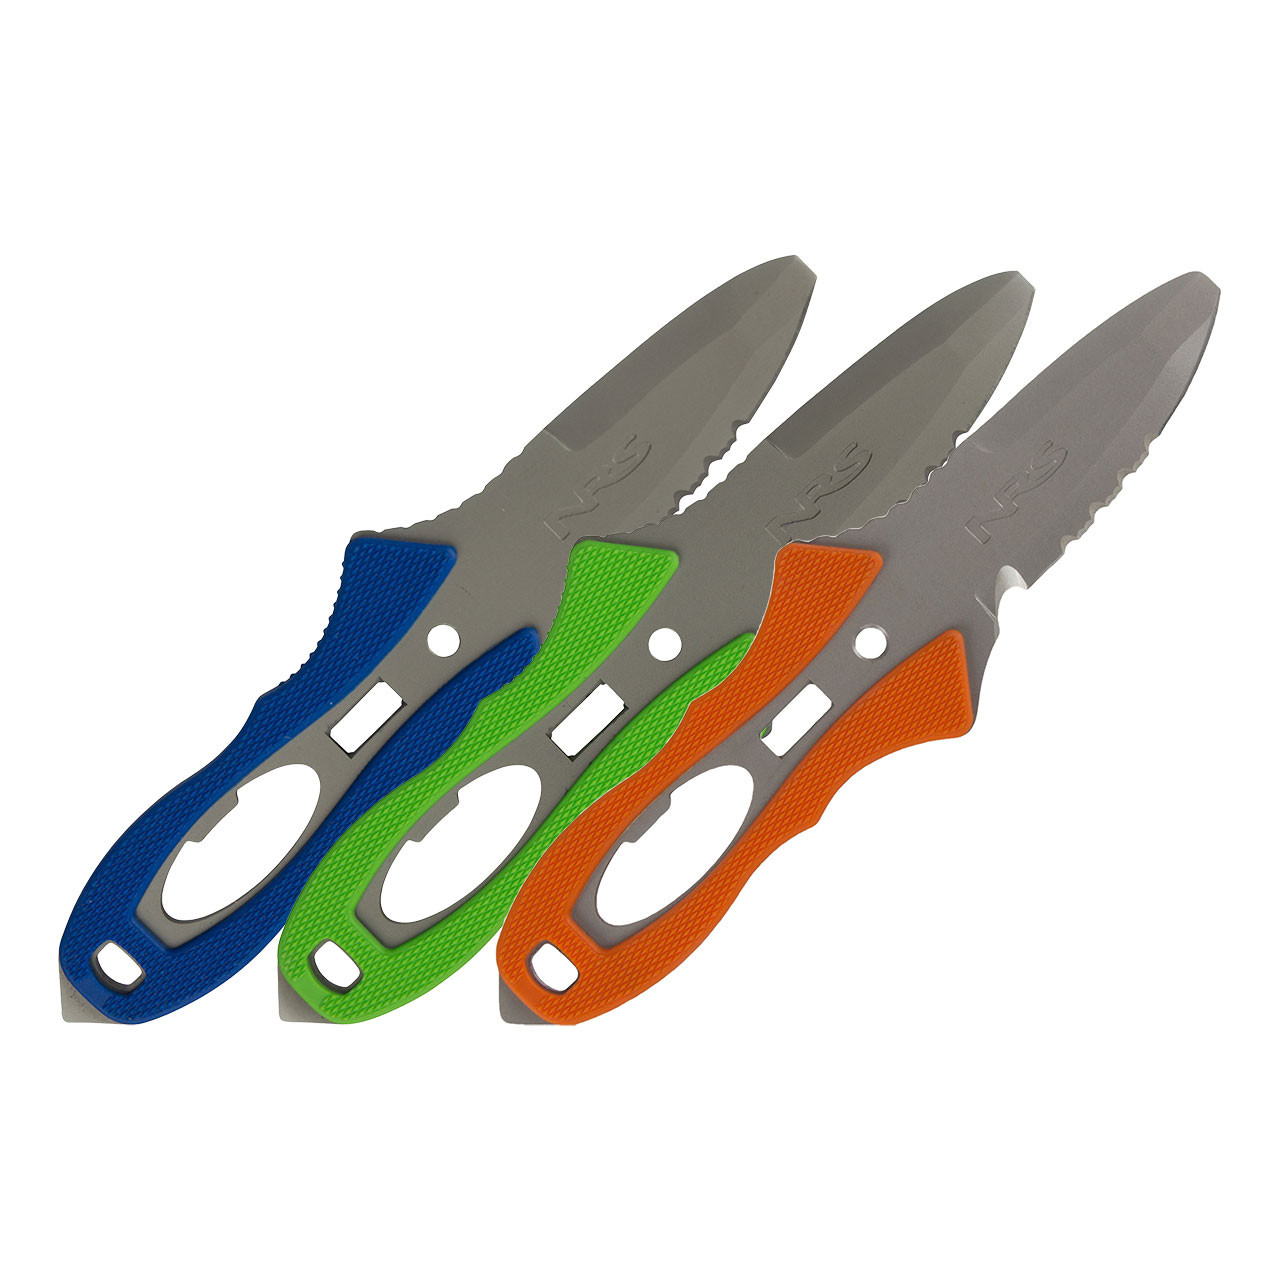 Overview of NRS Captain Rescue Knife 